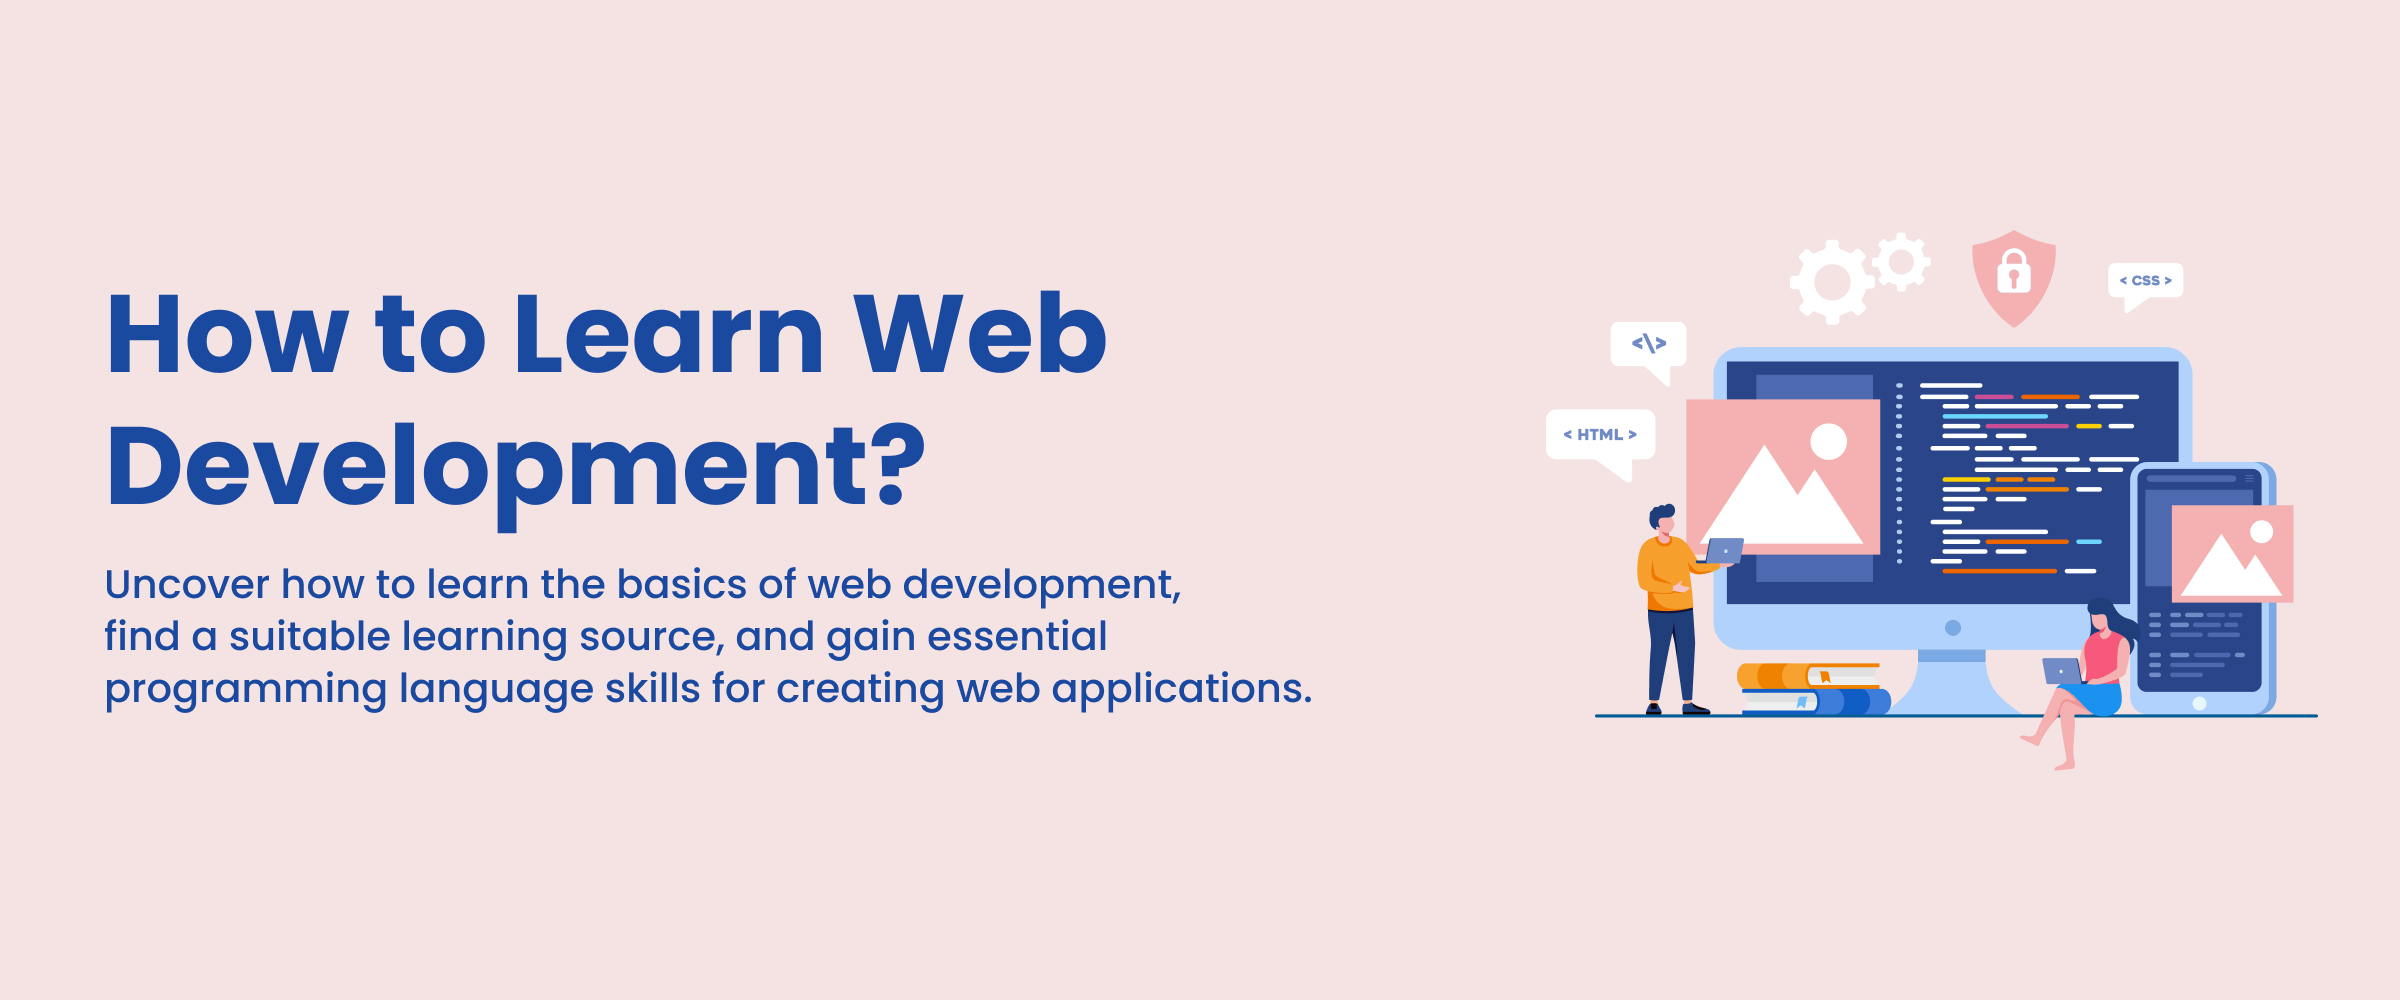 How to Learn Web Development